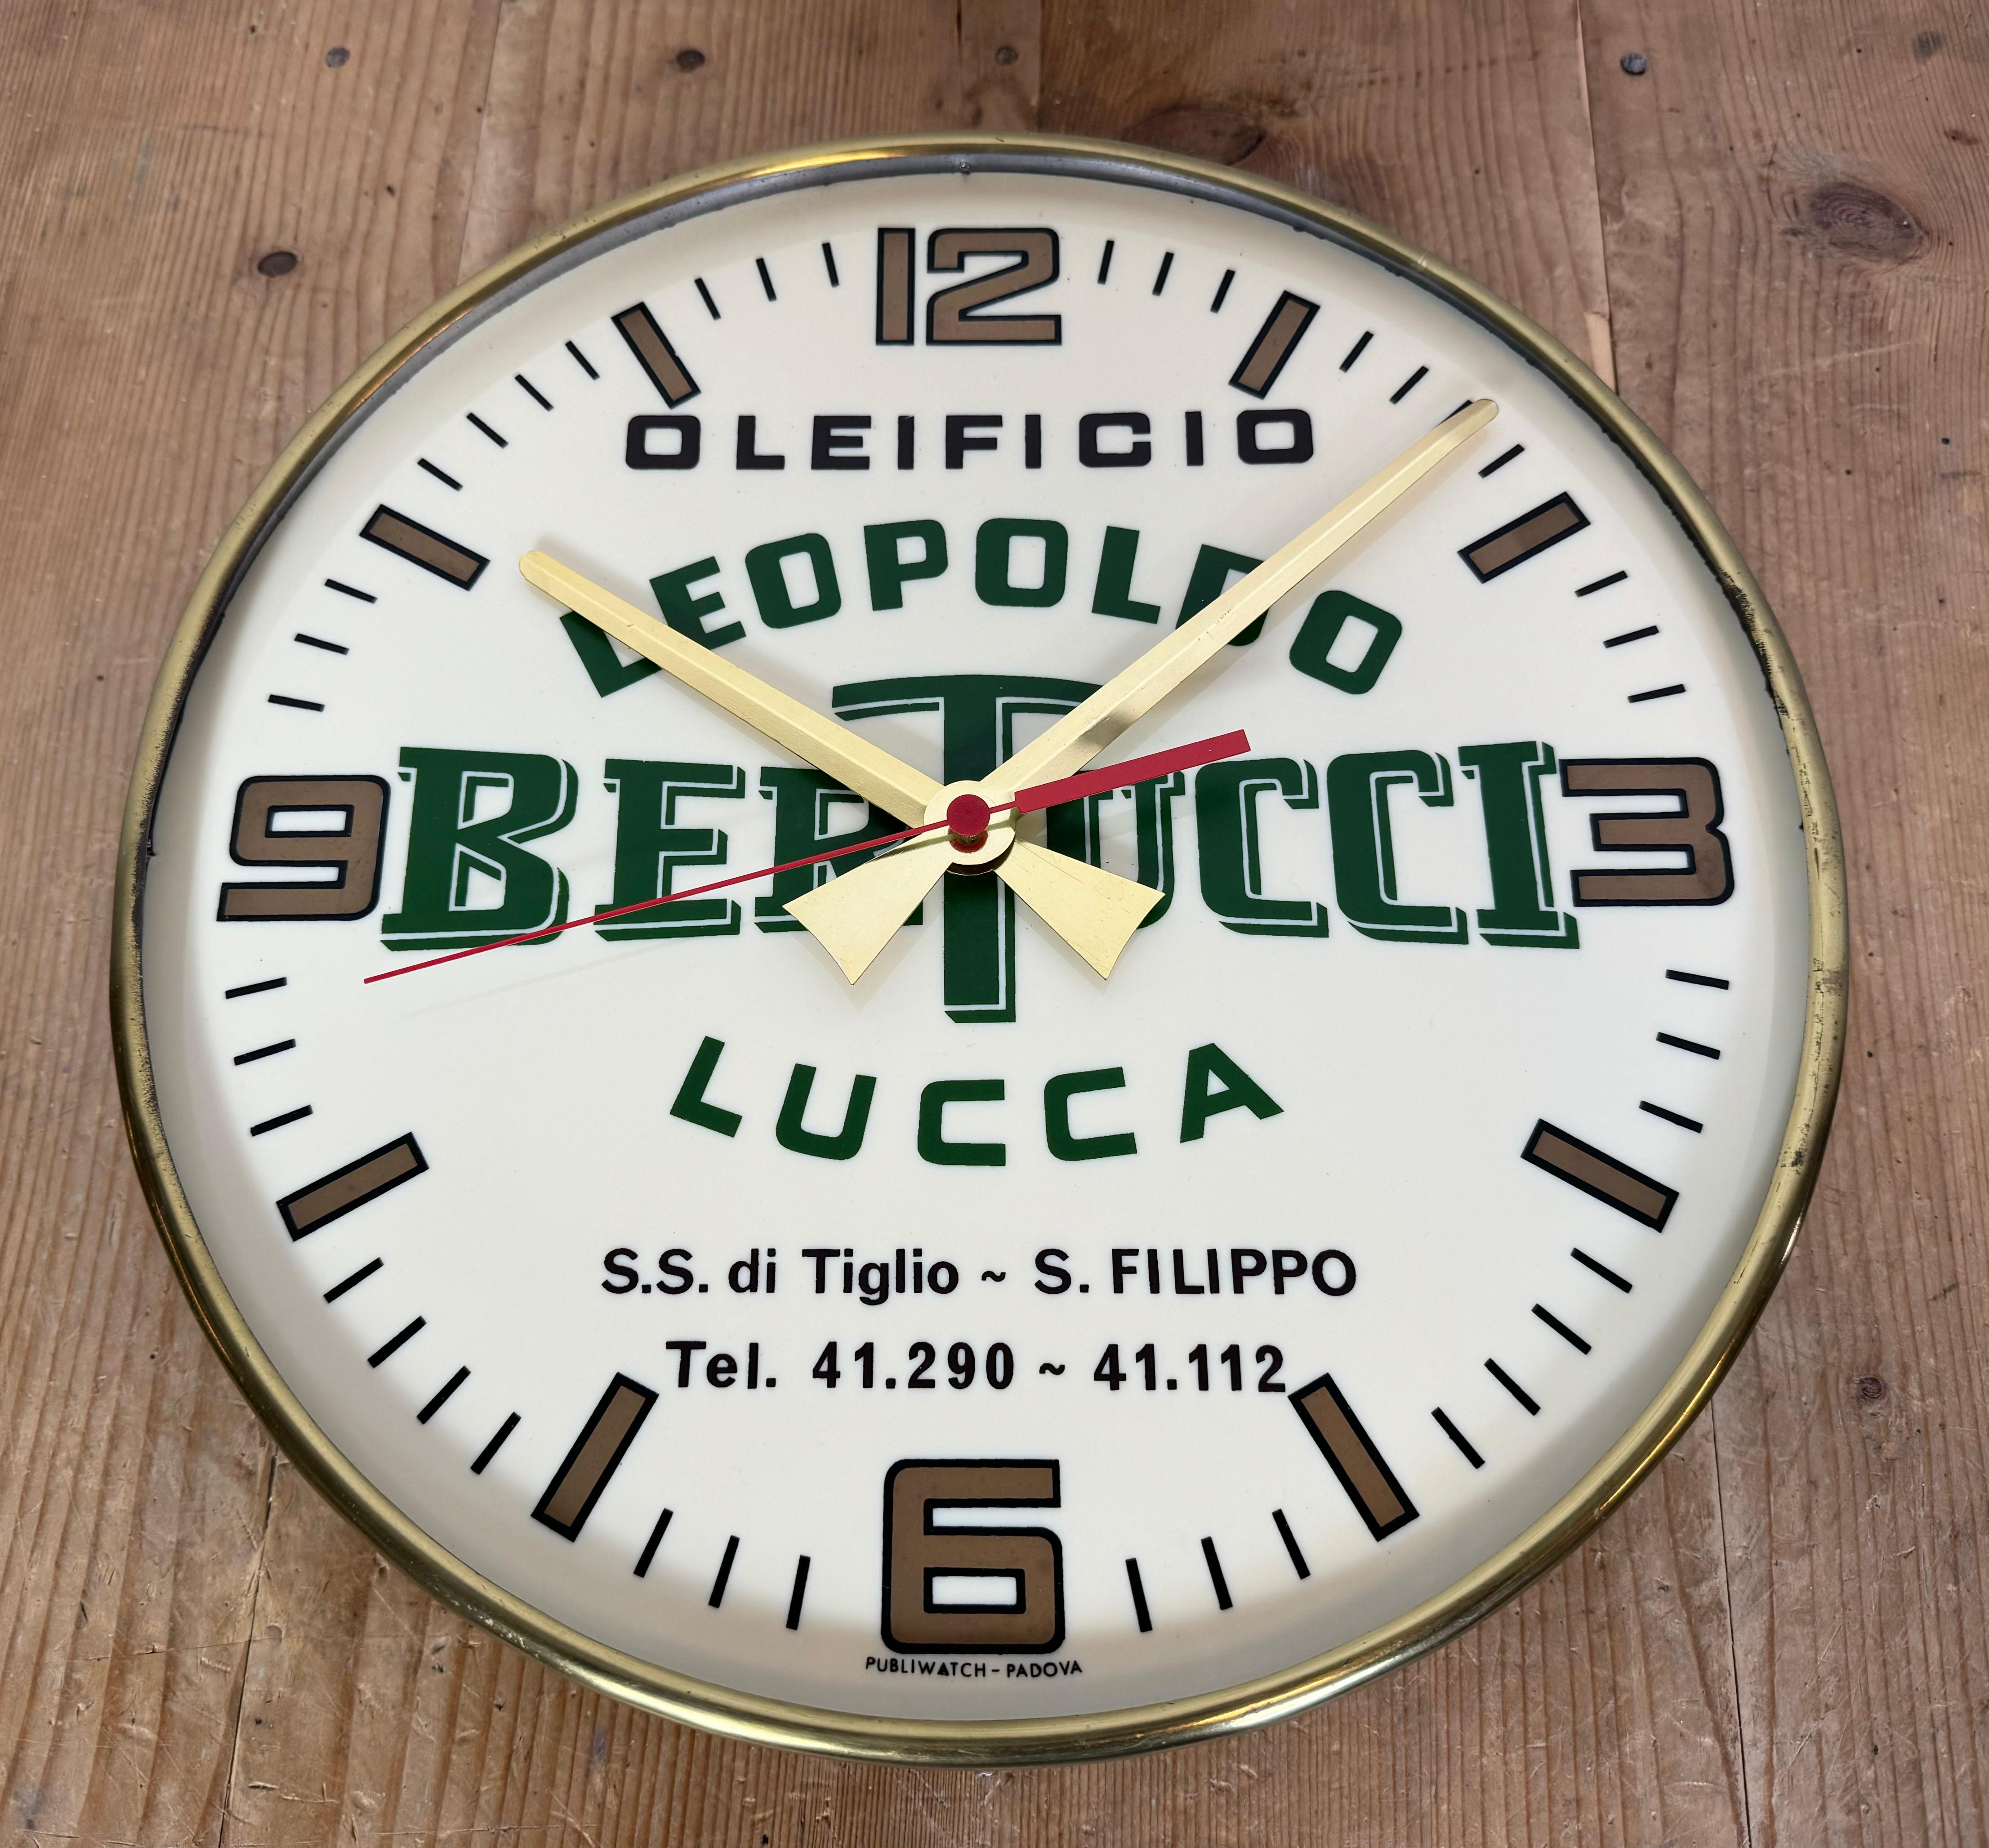 Vintage Italian Advertising Wall Clock, 1970s For Sale 5